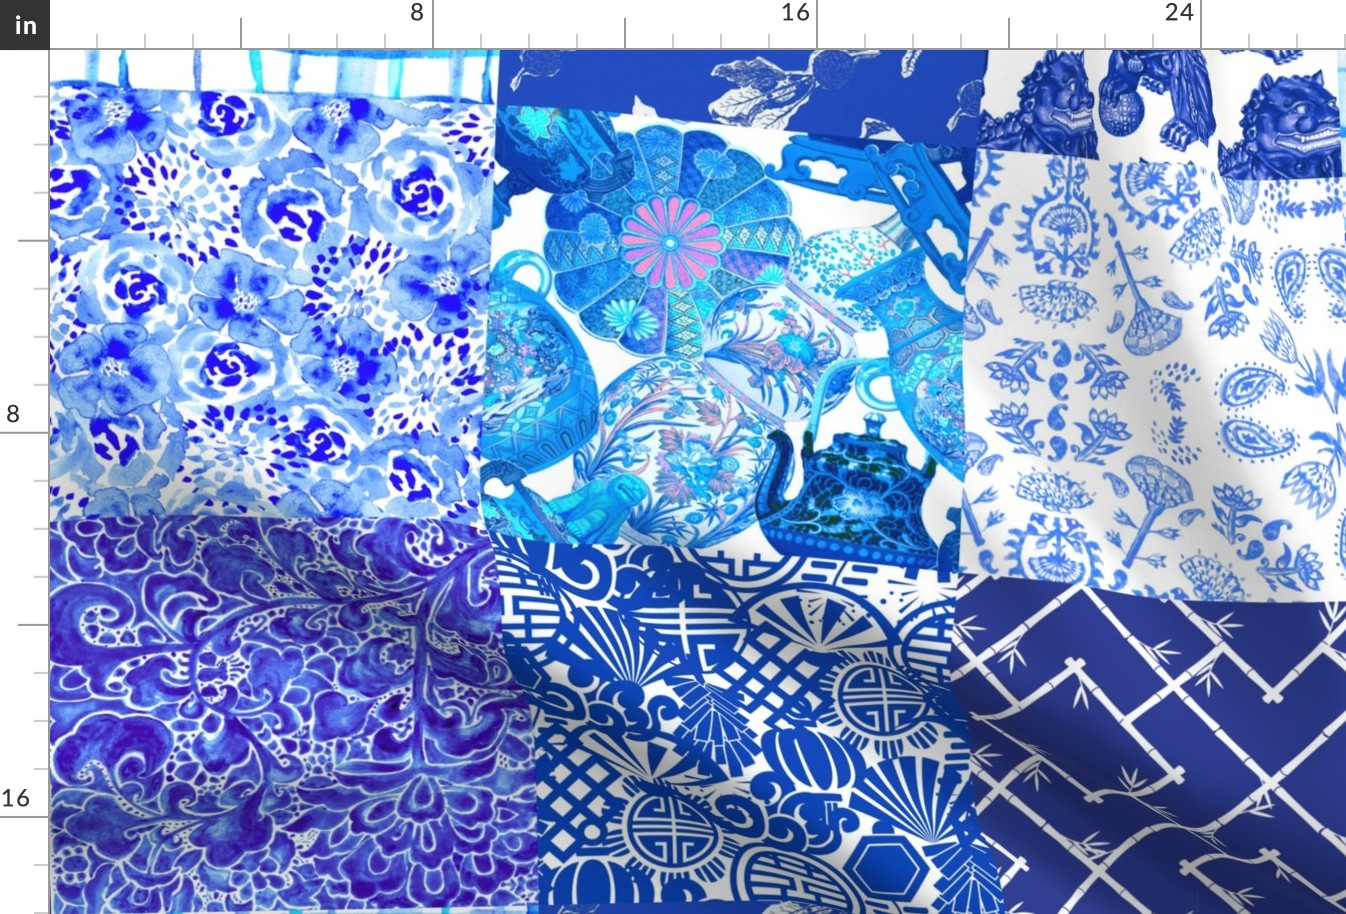 Blue Chinoiserie Cheater Quilt